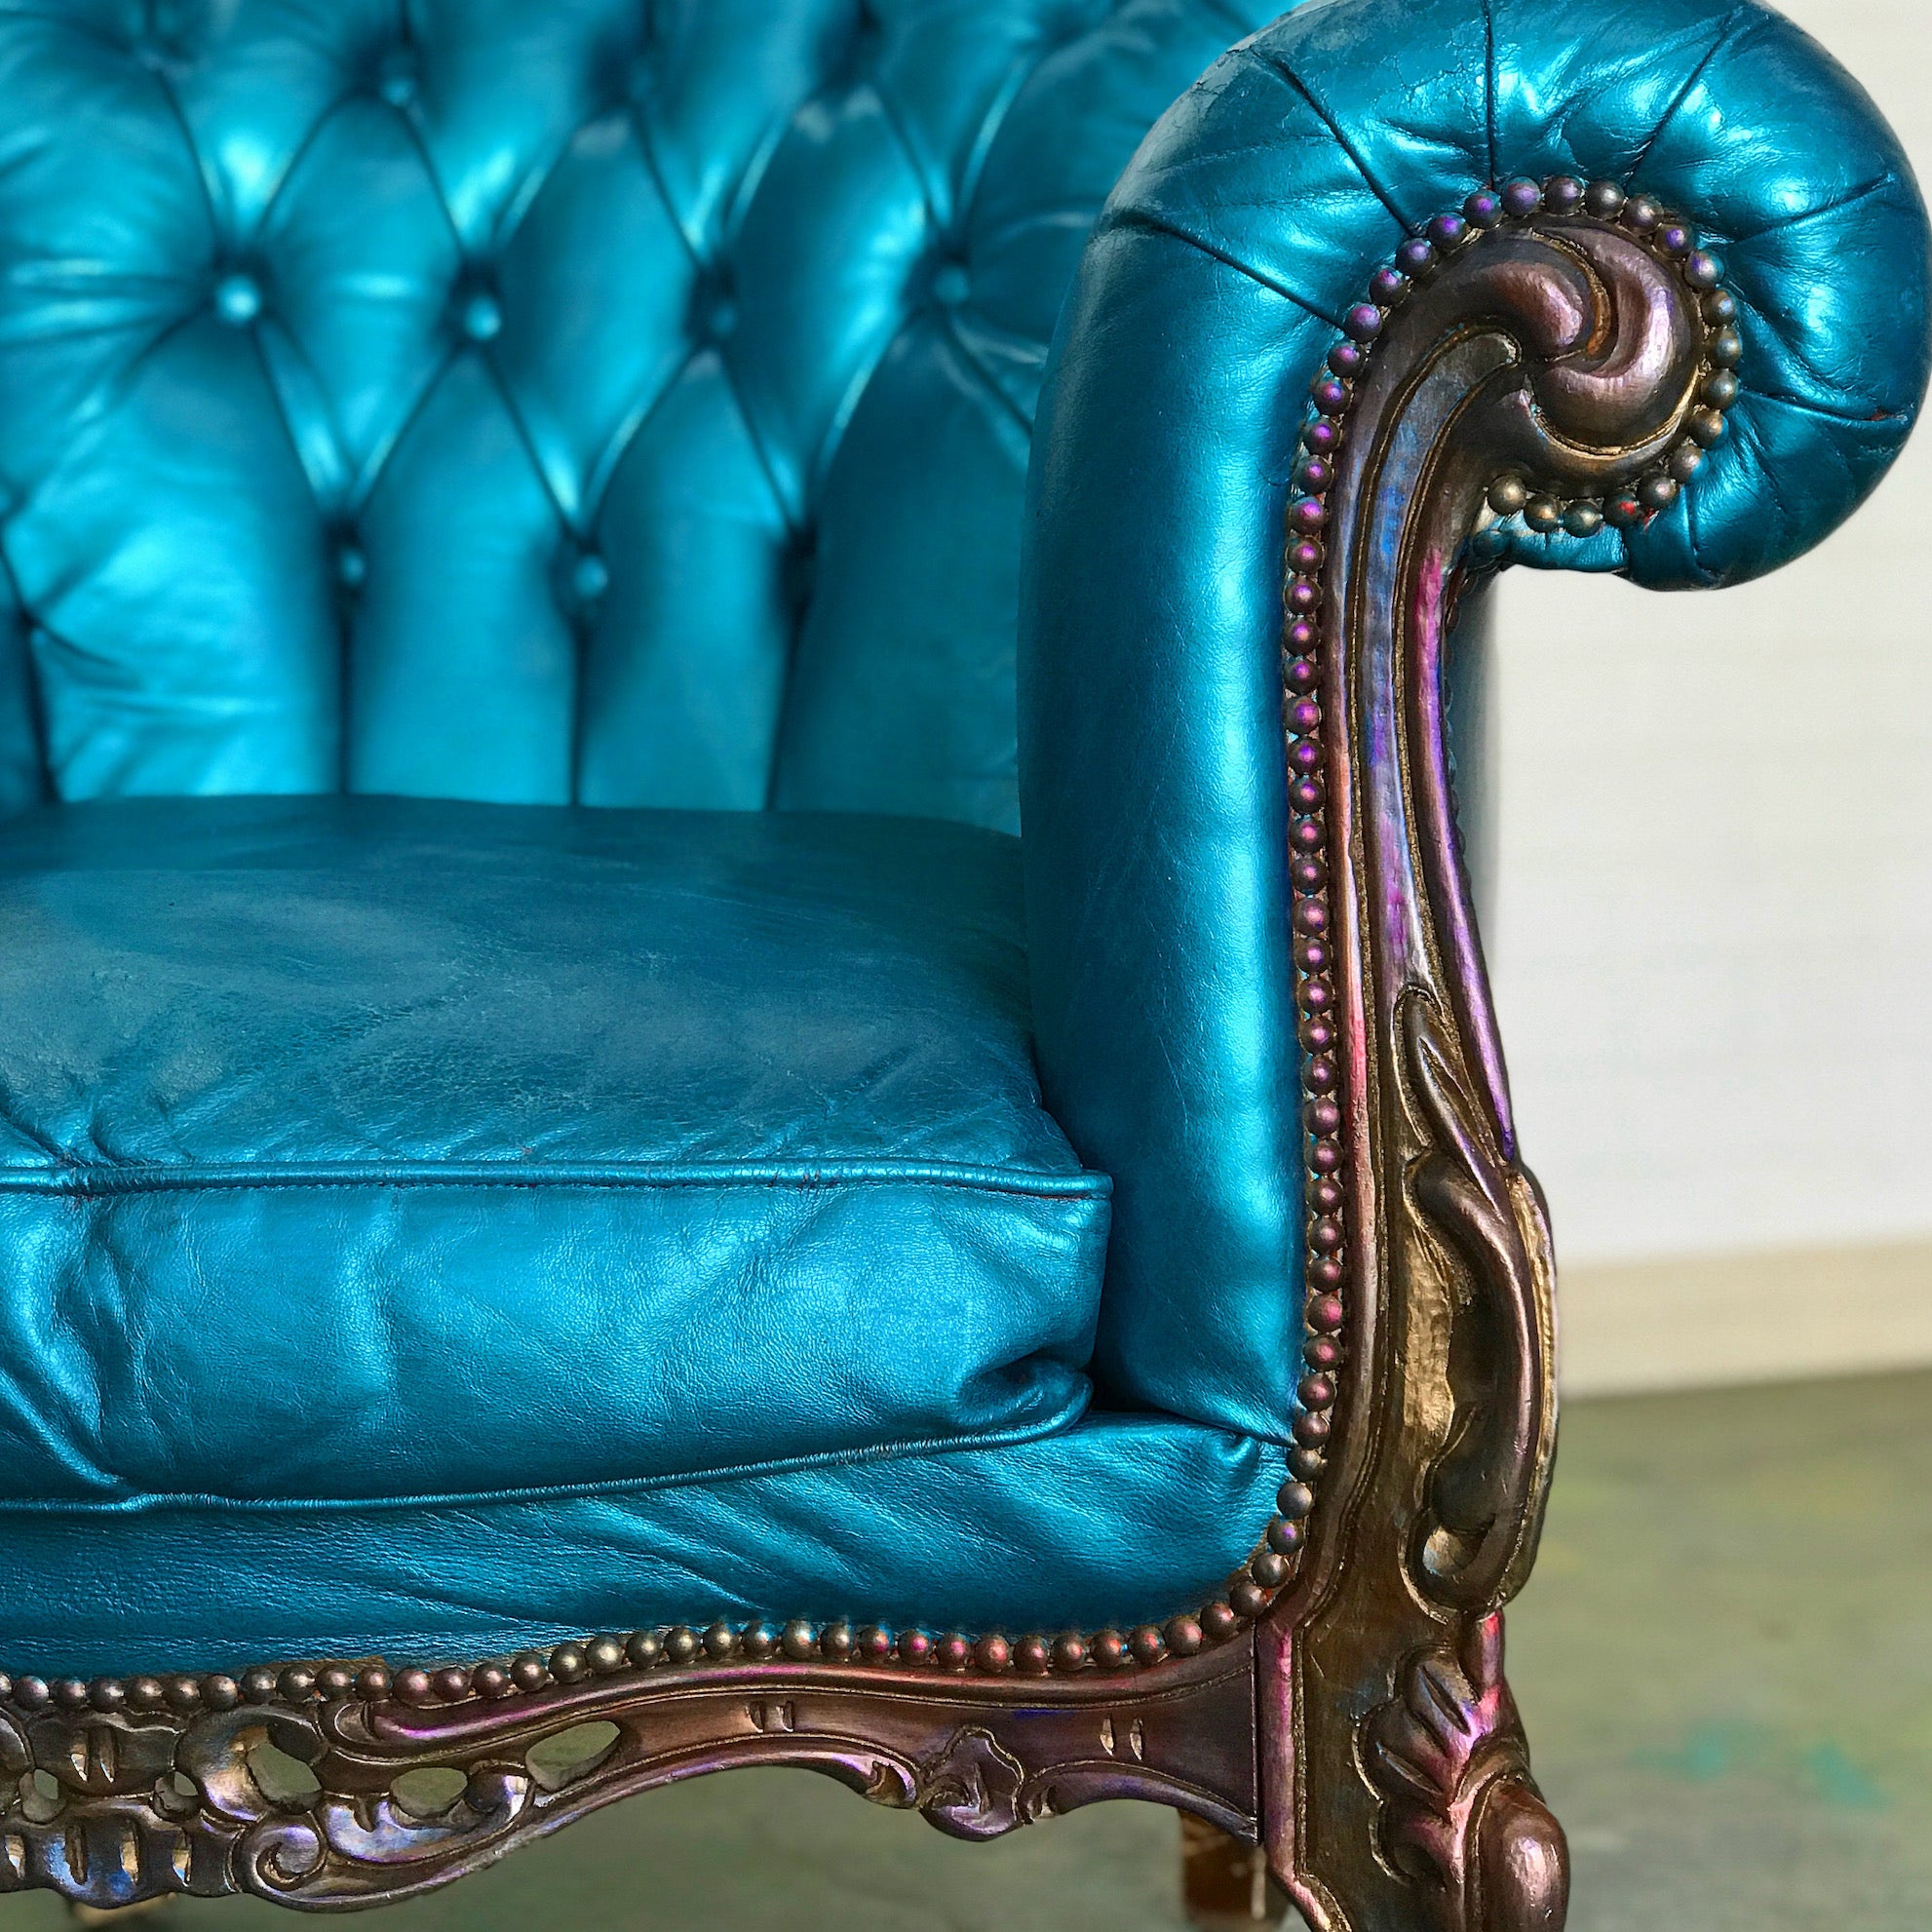 Can You Really Paint Leather Furniture? Yes! You Can! – Tanglewood